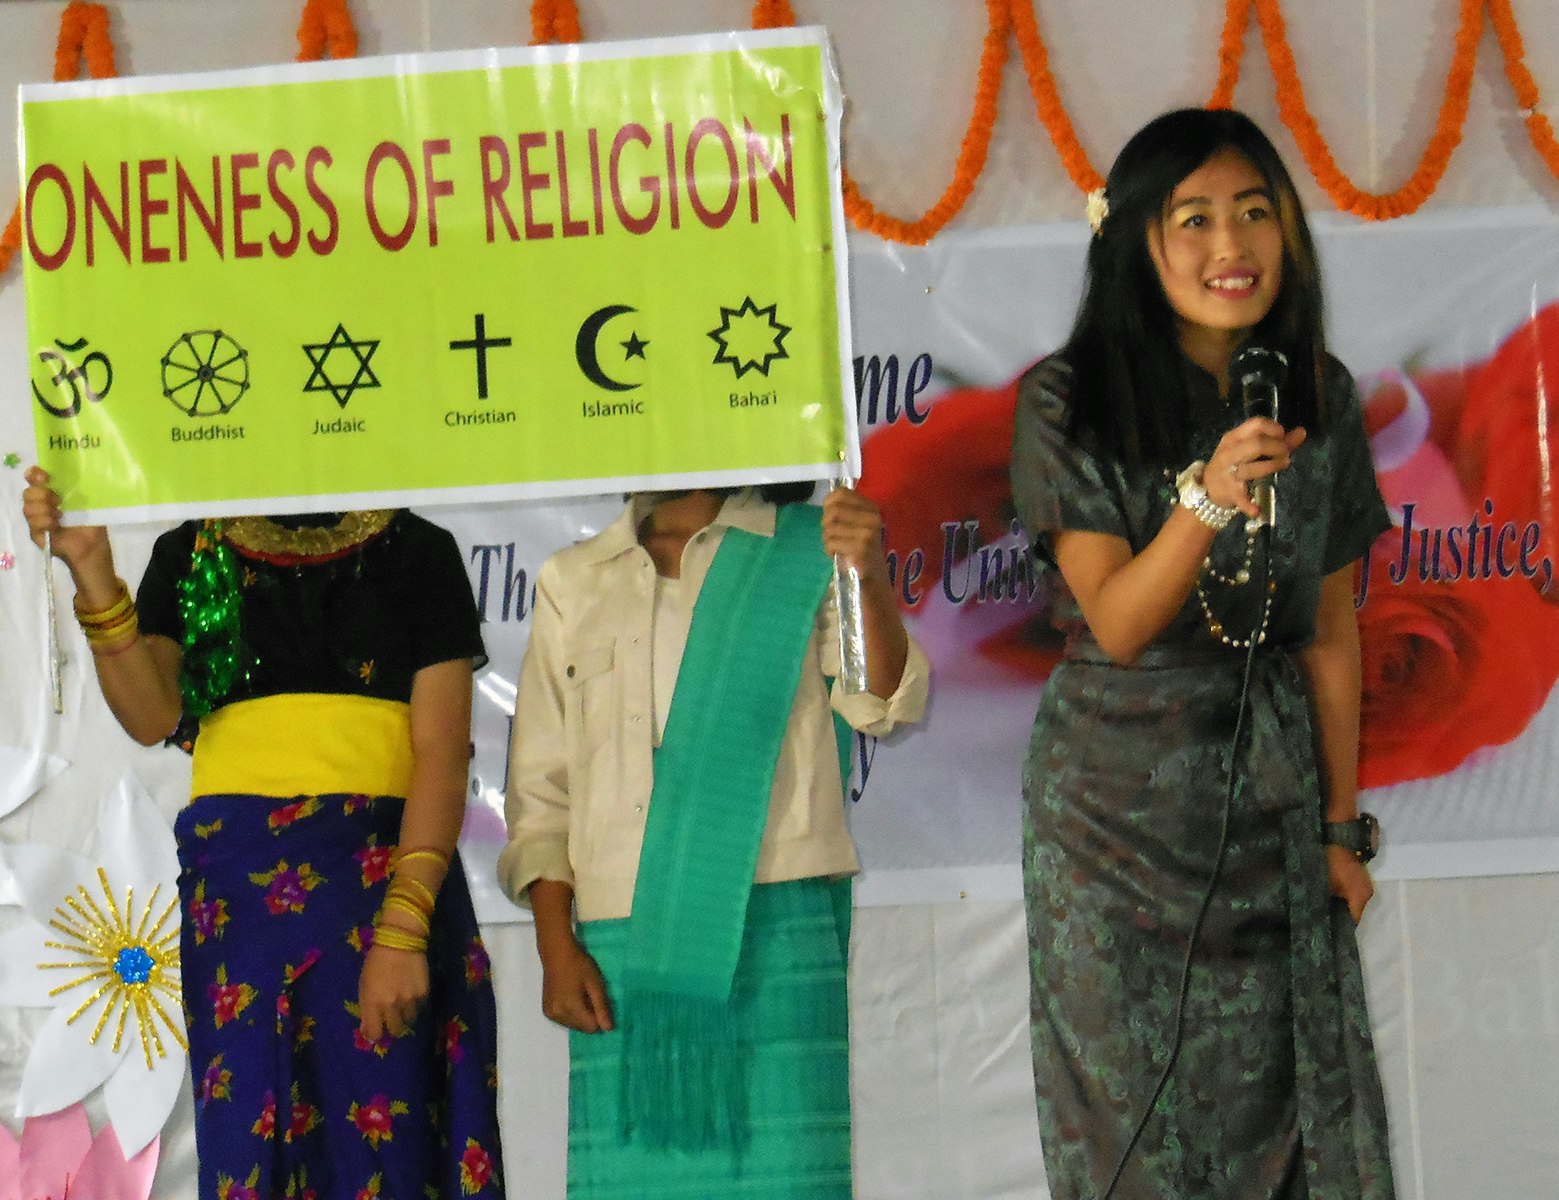 Fostering Unity: Students embrace the oneness of religion as they proudly display their message through vibrant placards.